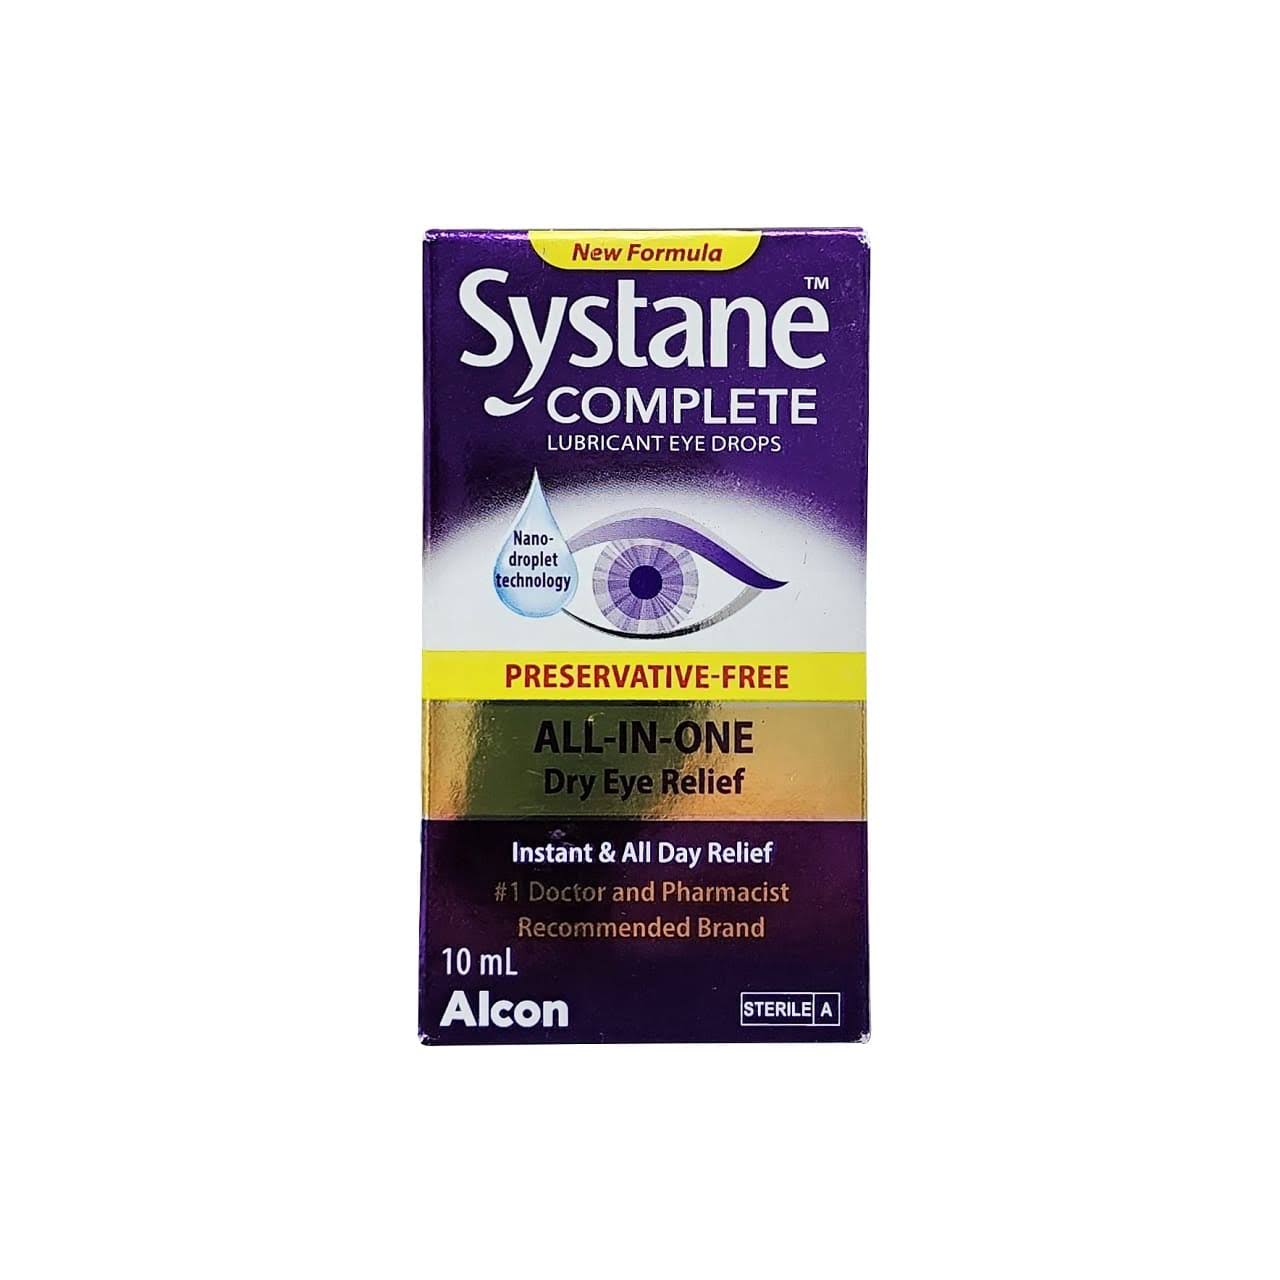 SYSTANE COMPLETE Preservative-Free Lubricant Eye Drops